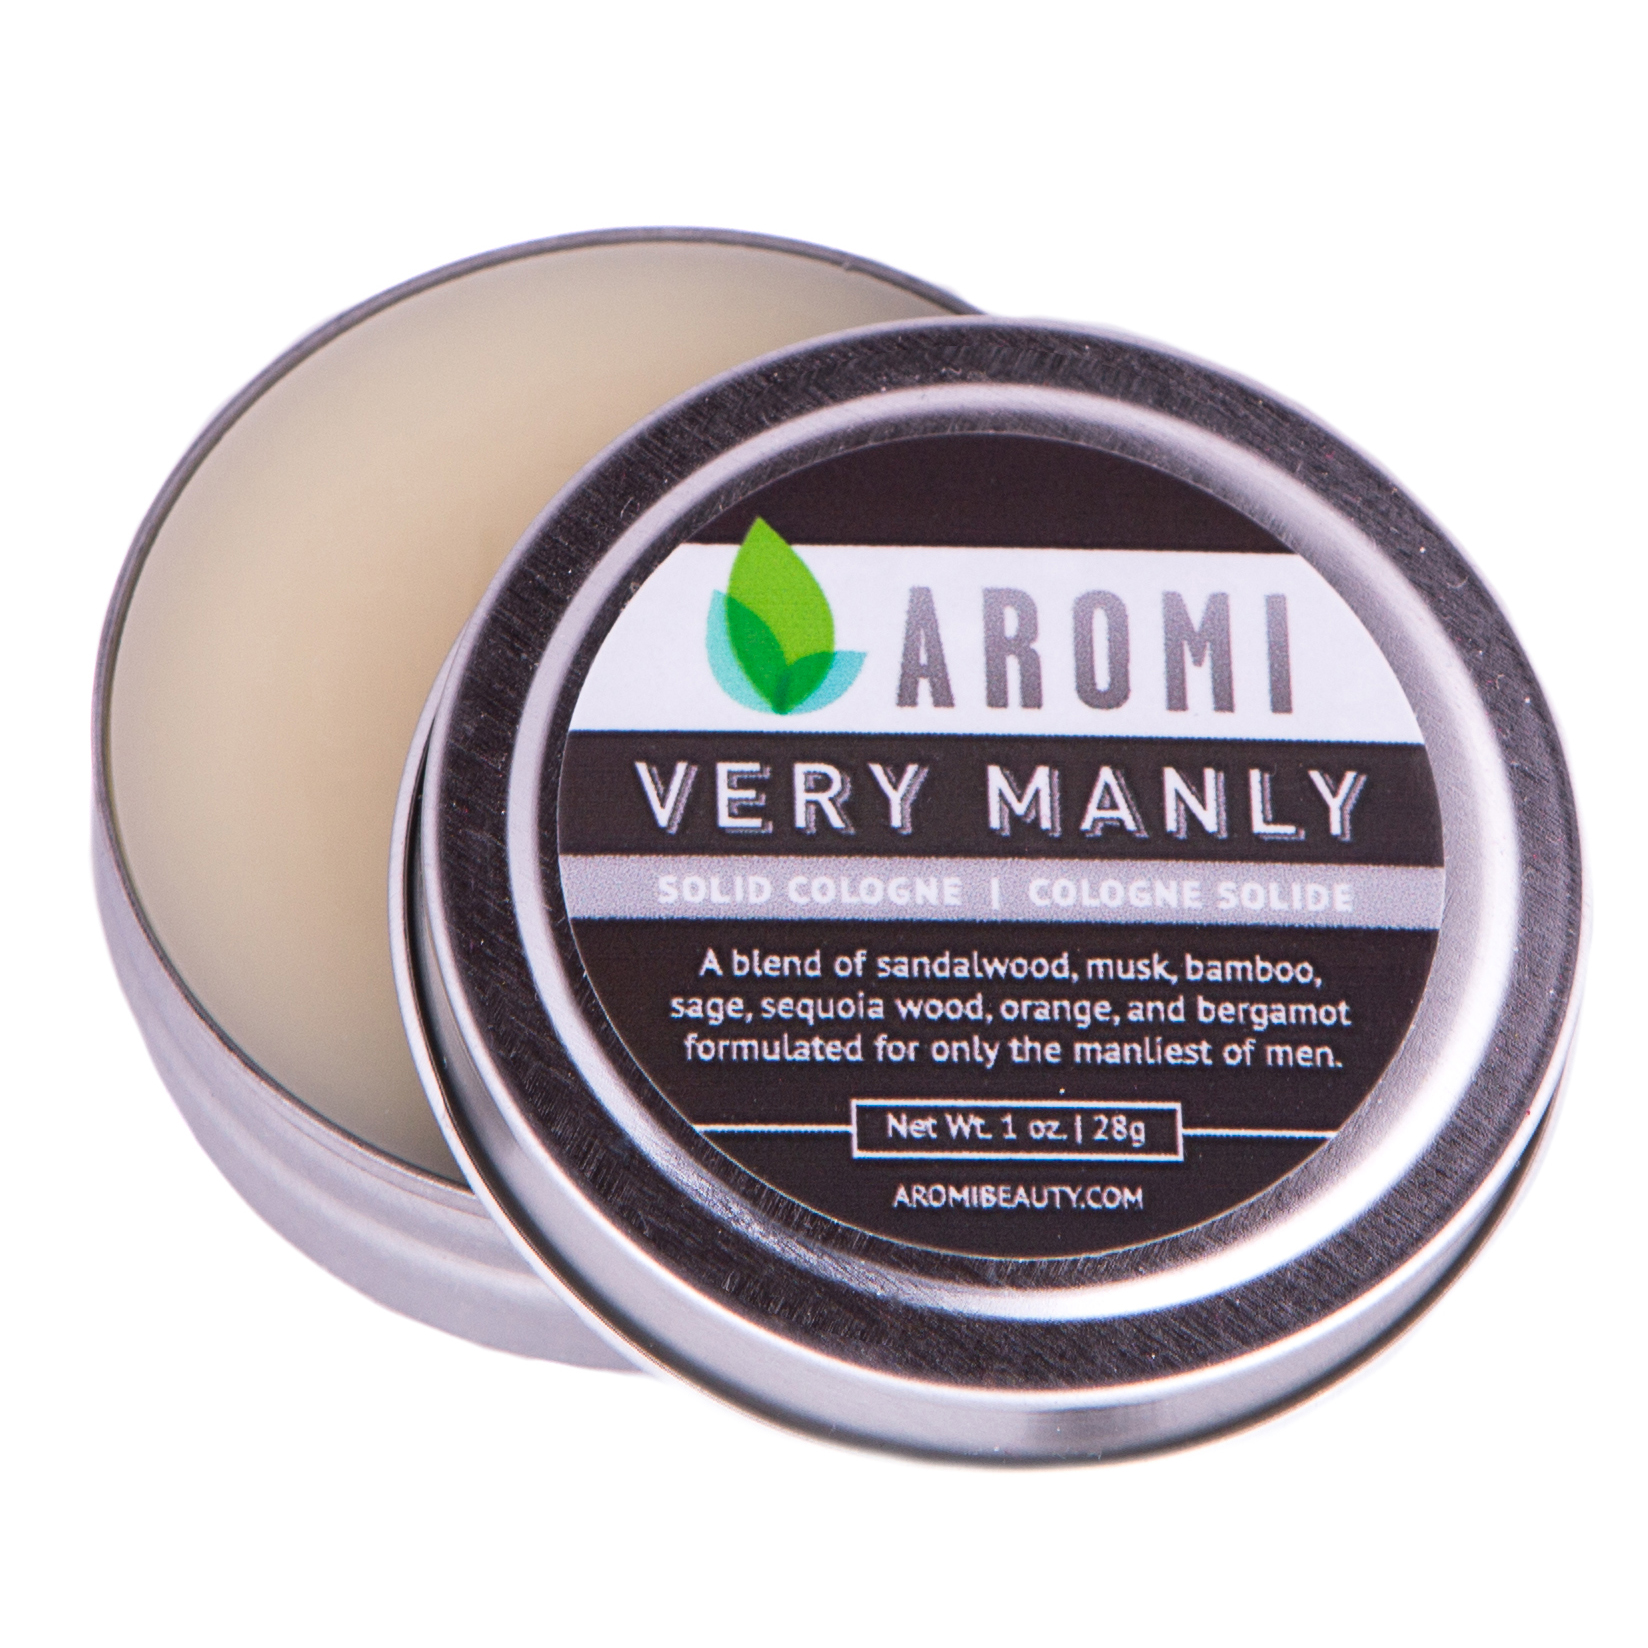 aromi-very-manly-solid-cologne.jpg